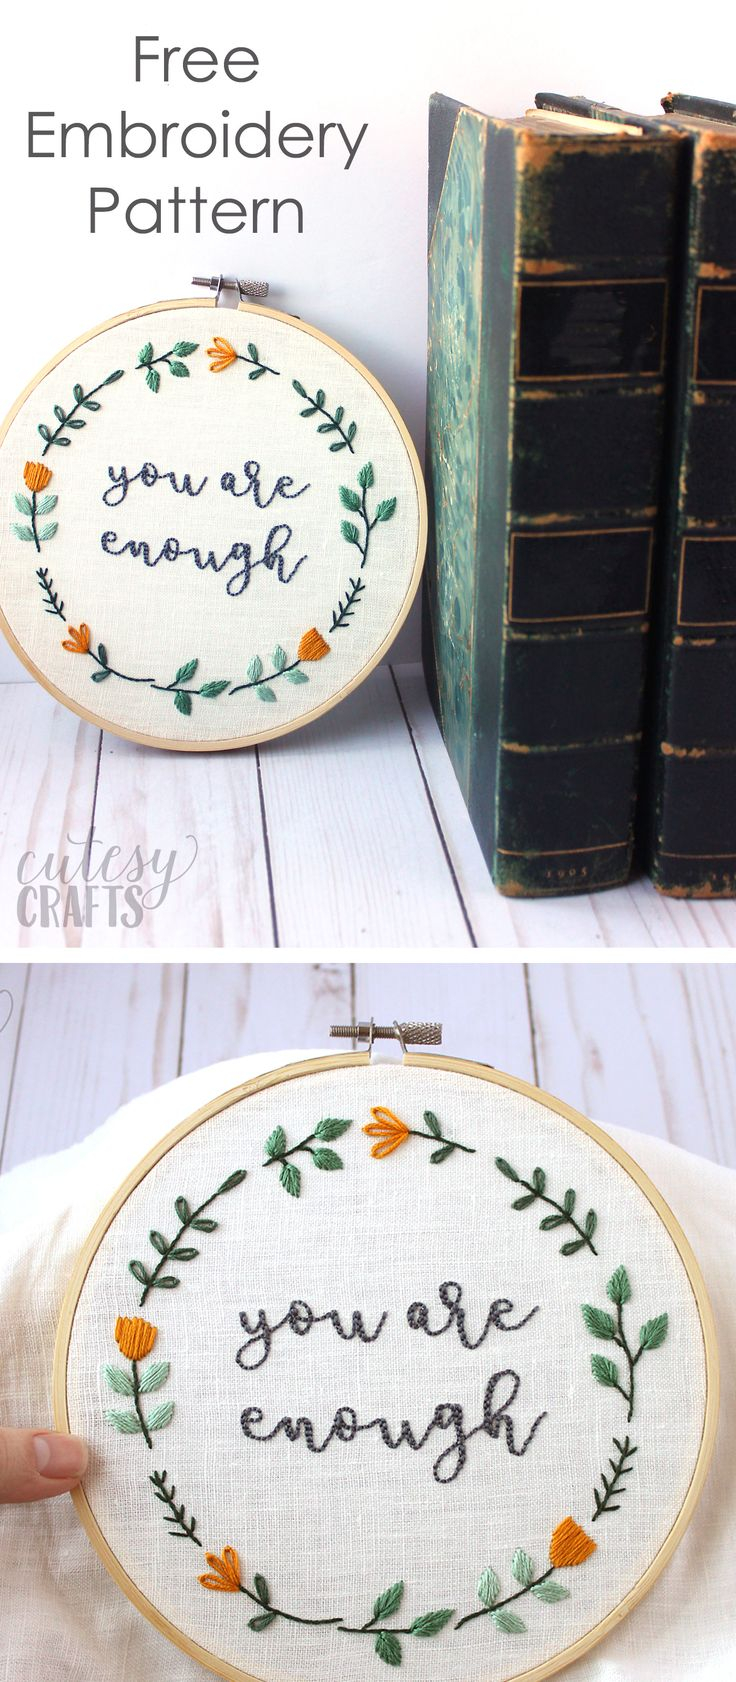 Hand Stitch Embroidery Patterns Free Diy Crafts Free Hand Embroidery Pattern For An Inspirational Quote